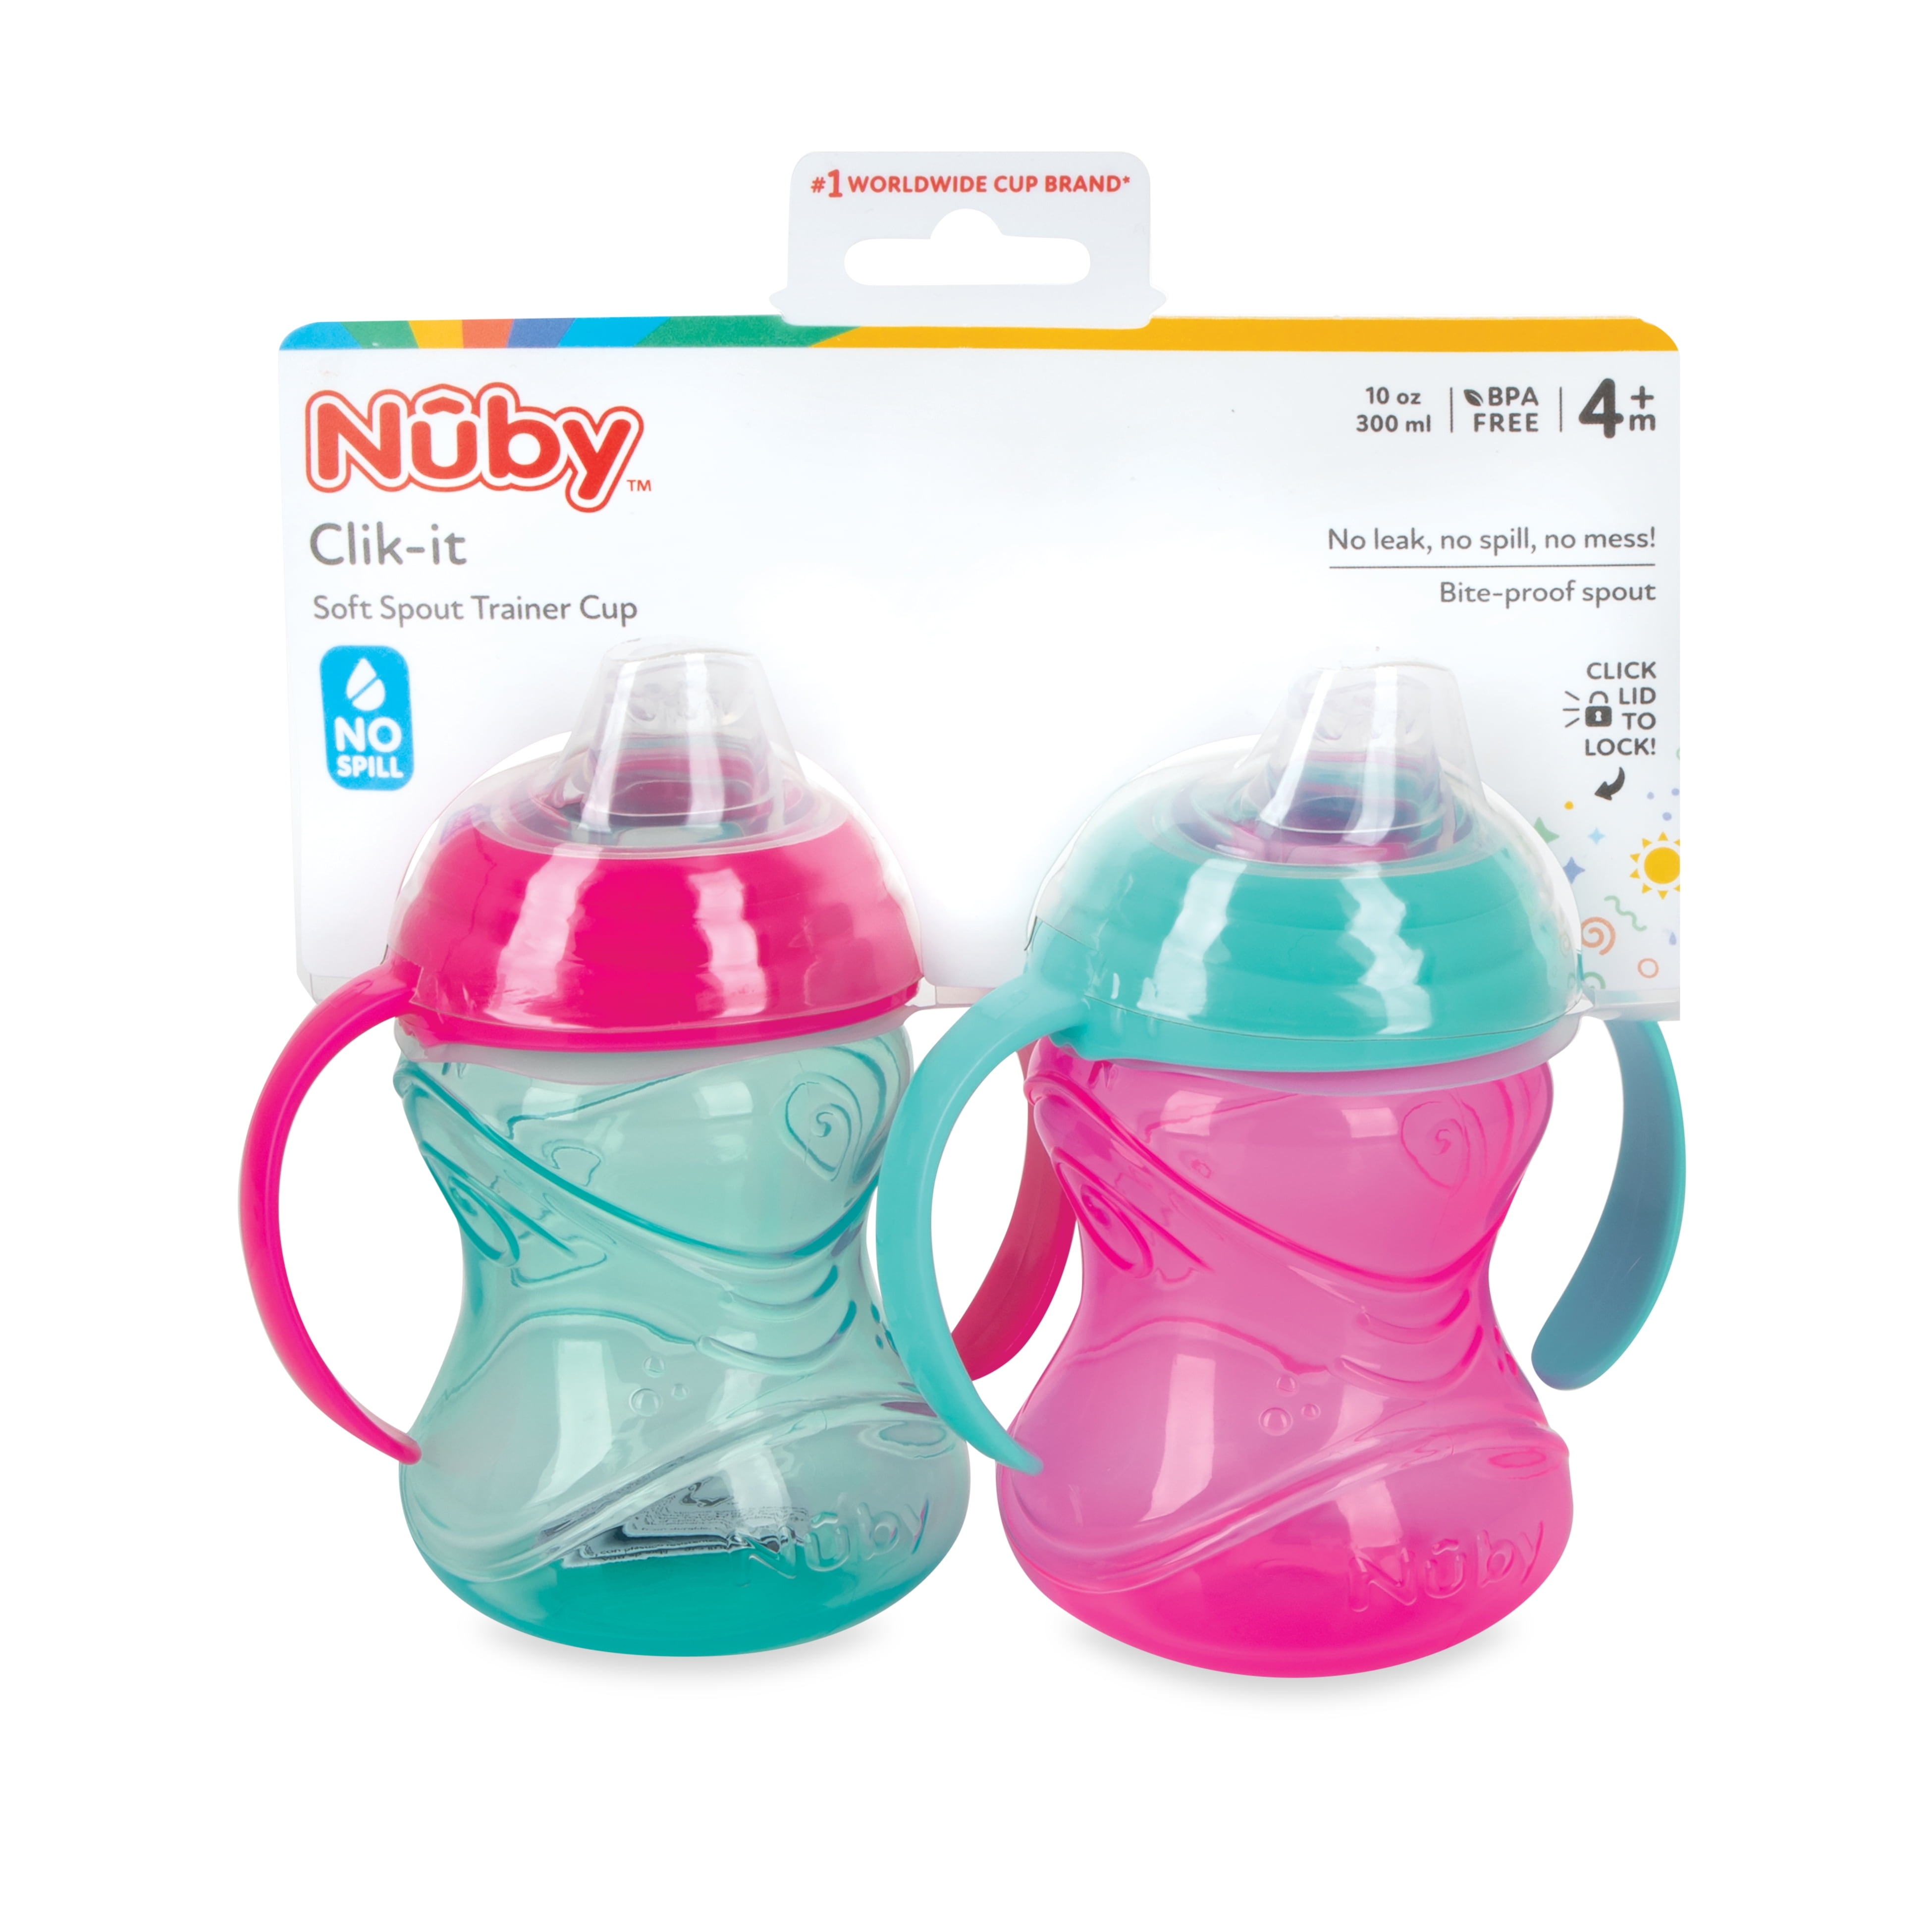 Nuby Monster 2 Handle No-Spill Sippy Cup, 8 oz - Parents' Favorite